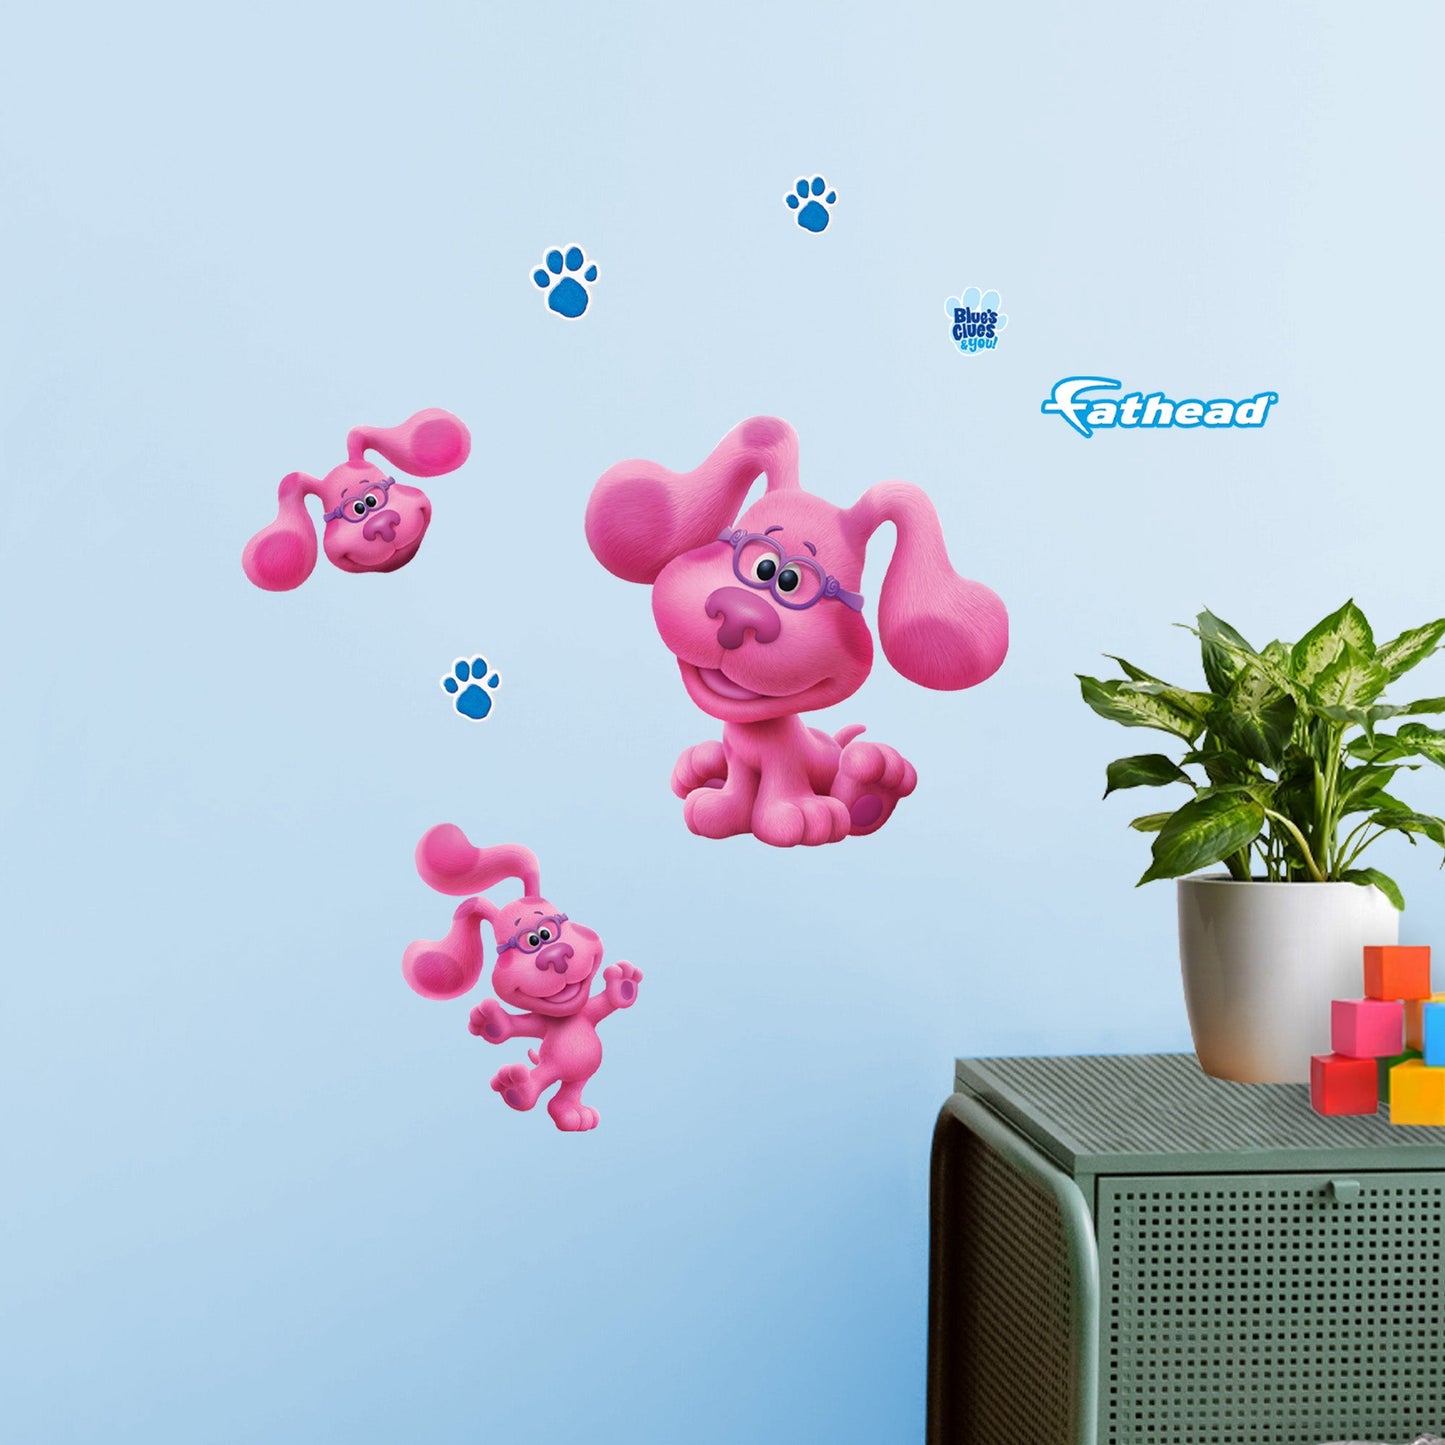 Blue's Clues: Magenta RealBigs - Officially Licensed Nickelodeon Removable Adhesive Decal